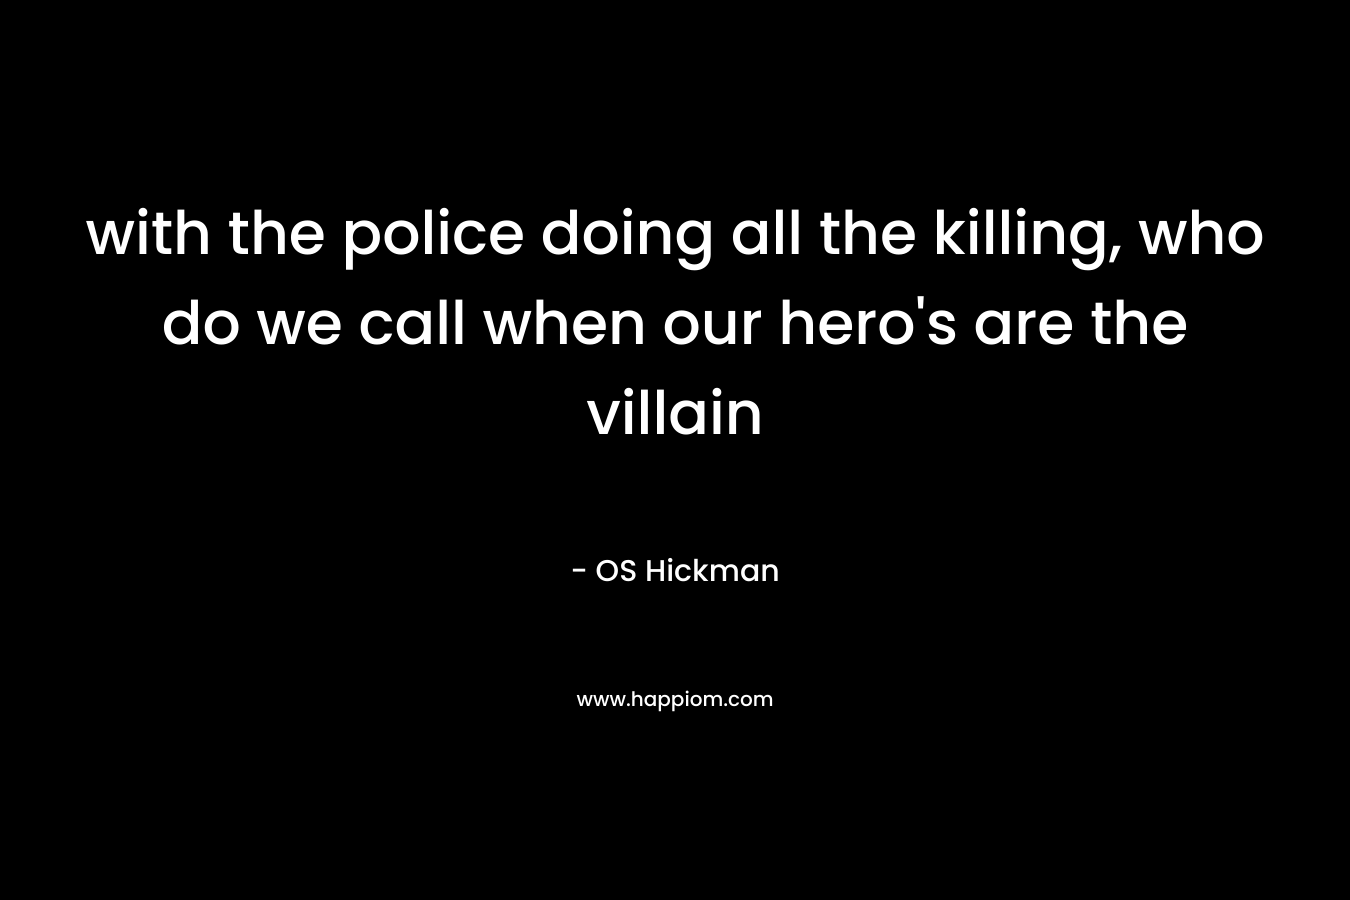 with the police doing all the killing, who do we call when our hero’s are the villain – OS Hickman